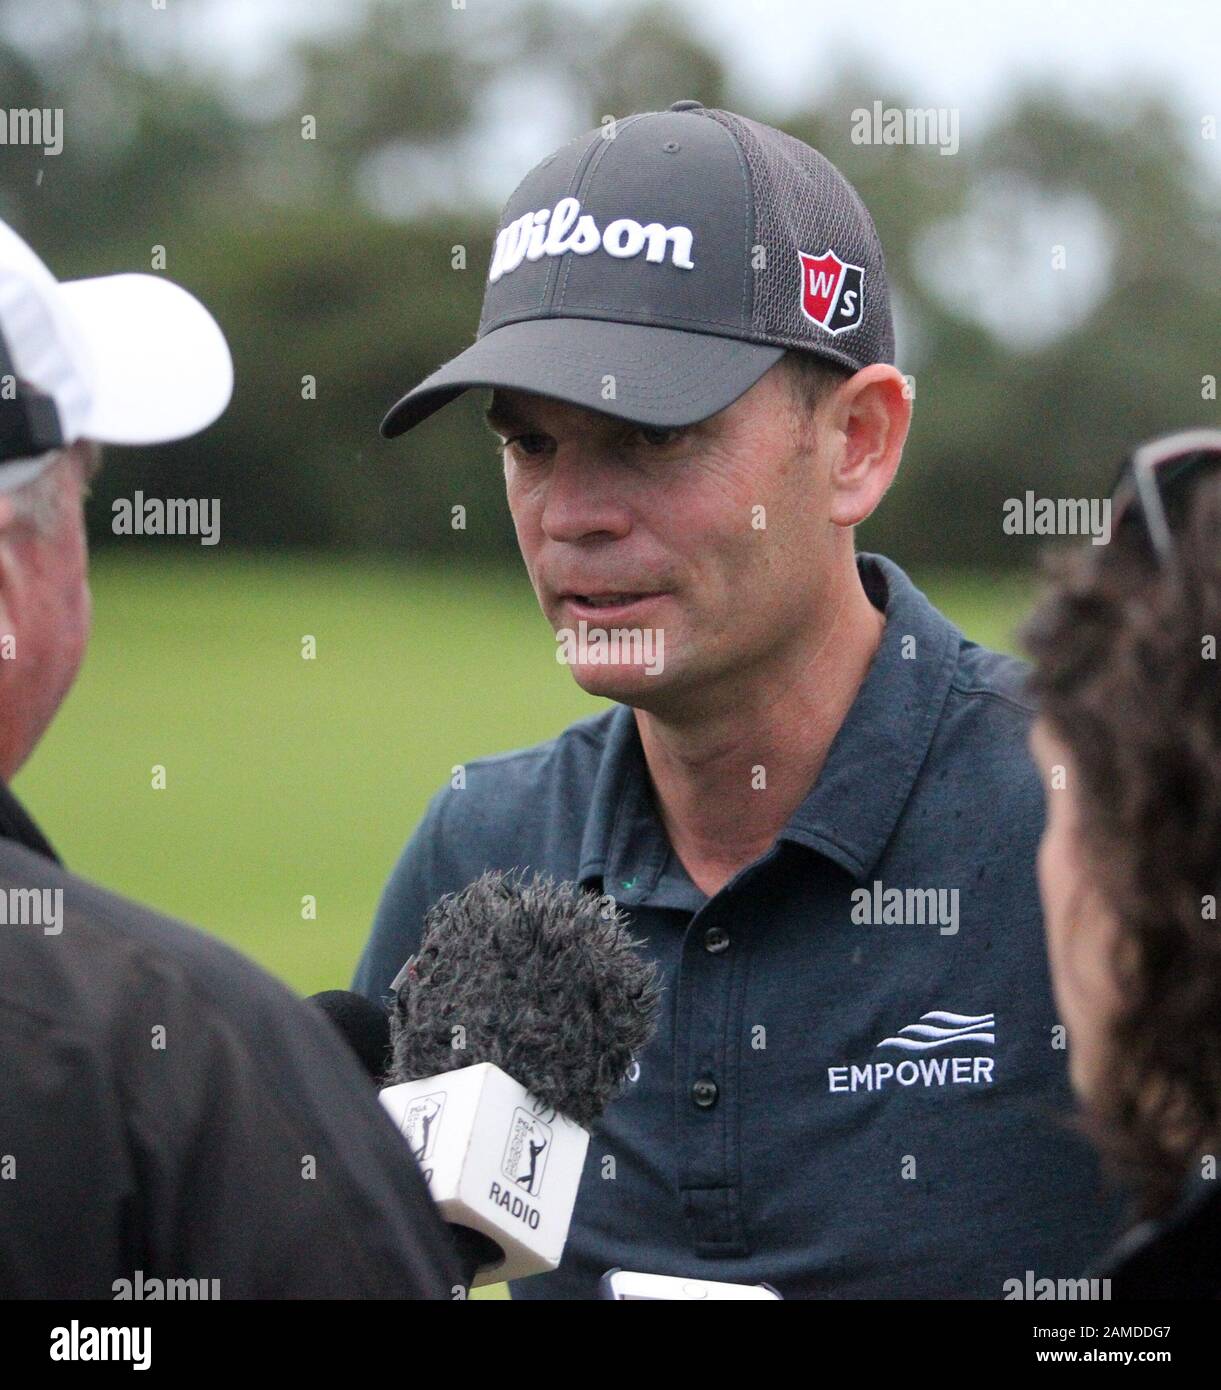 Honolulu, Hawaii, USA. January 12, 2020 - Brendan Steele (USA) talks of his playoff hole loss after the final round at the Sony Open at the Waialae Country Club in Honolulu, HI - Michael Sullivan/CSM Credit: Cal Sport Media/Alamy Live News Stock Photo